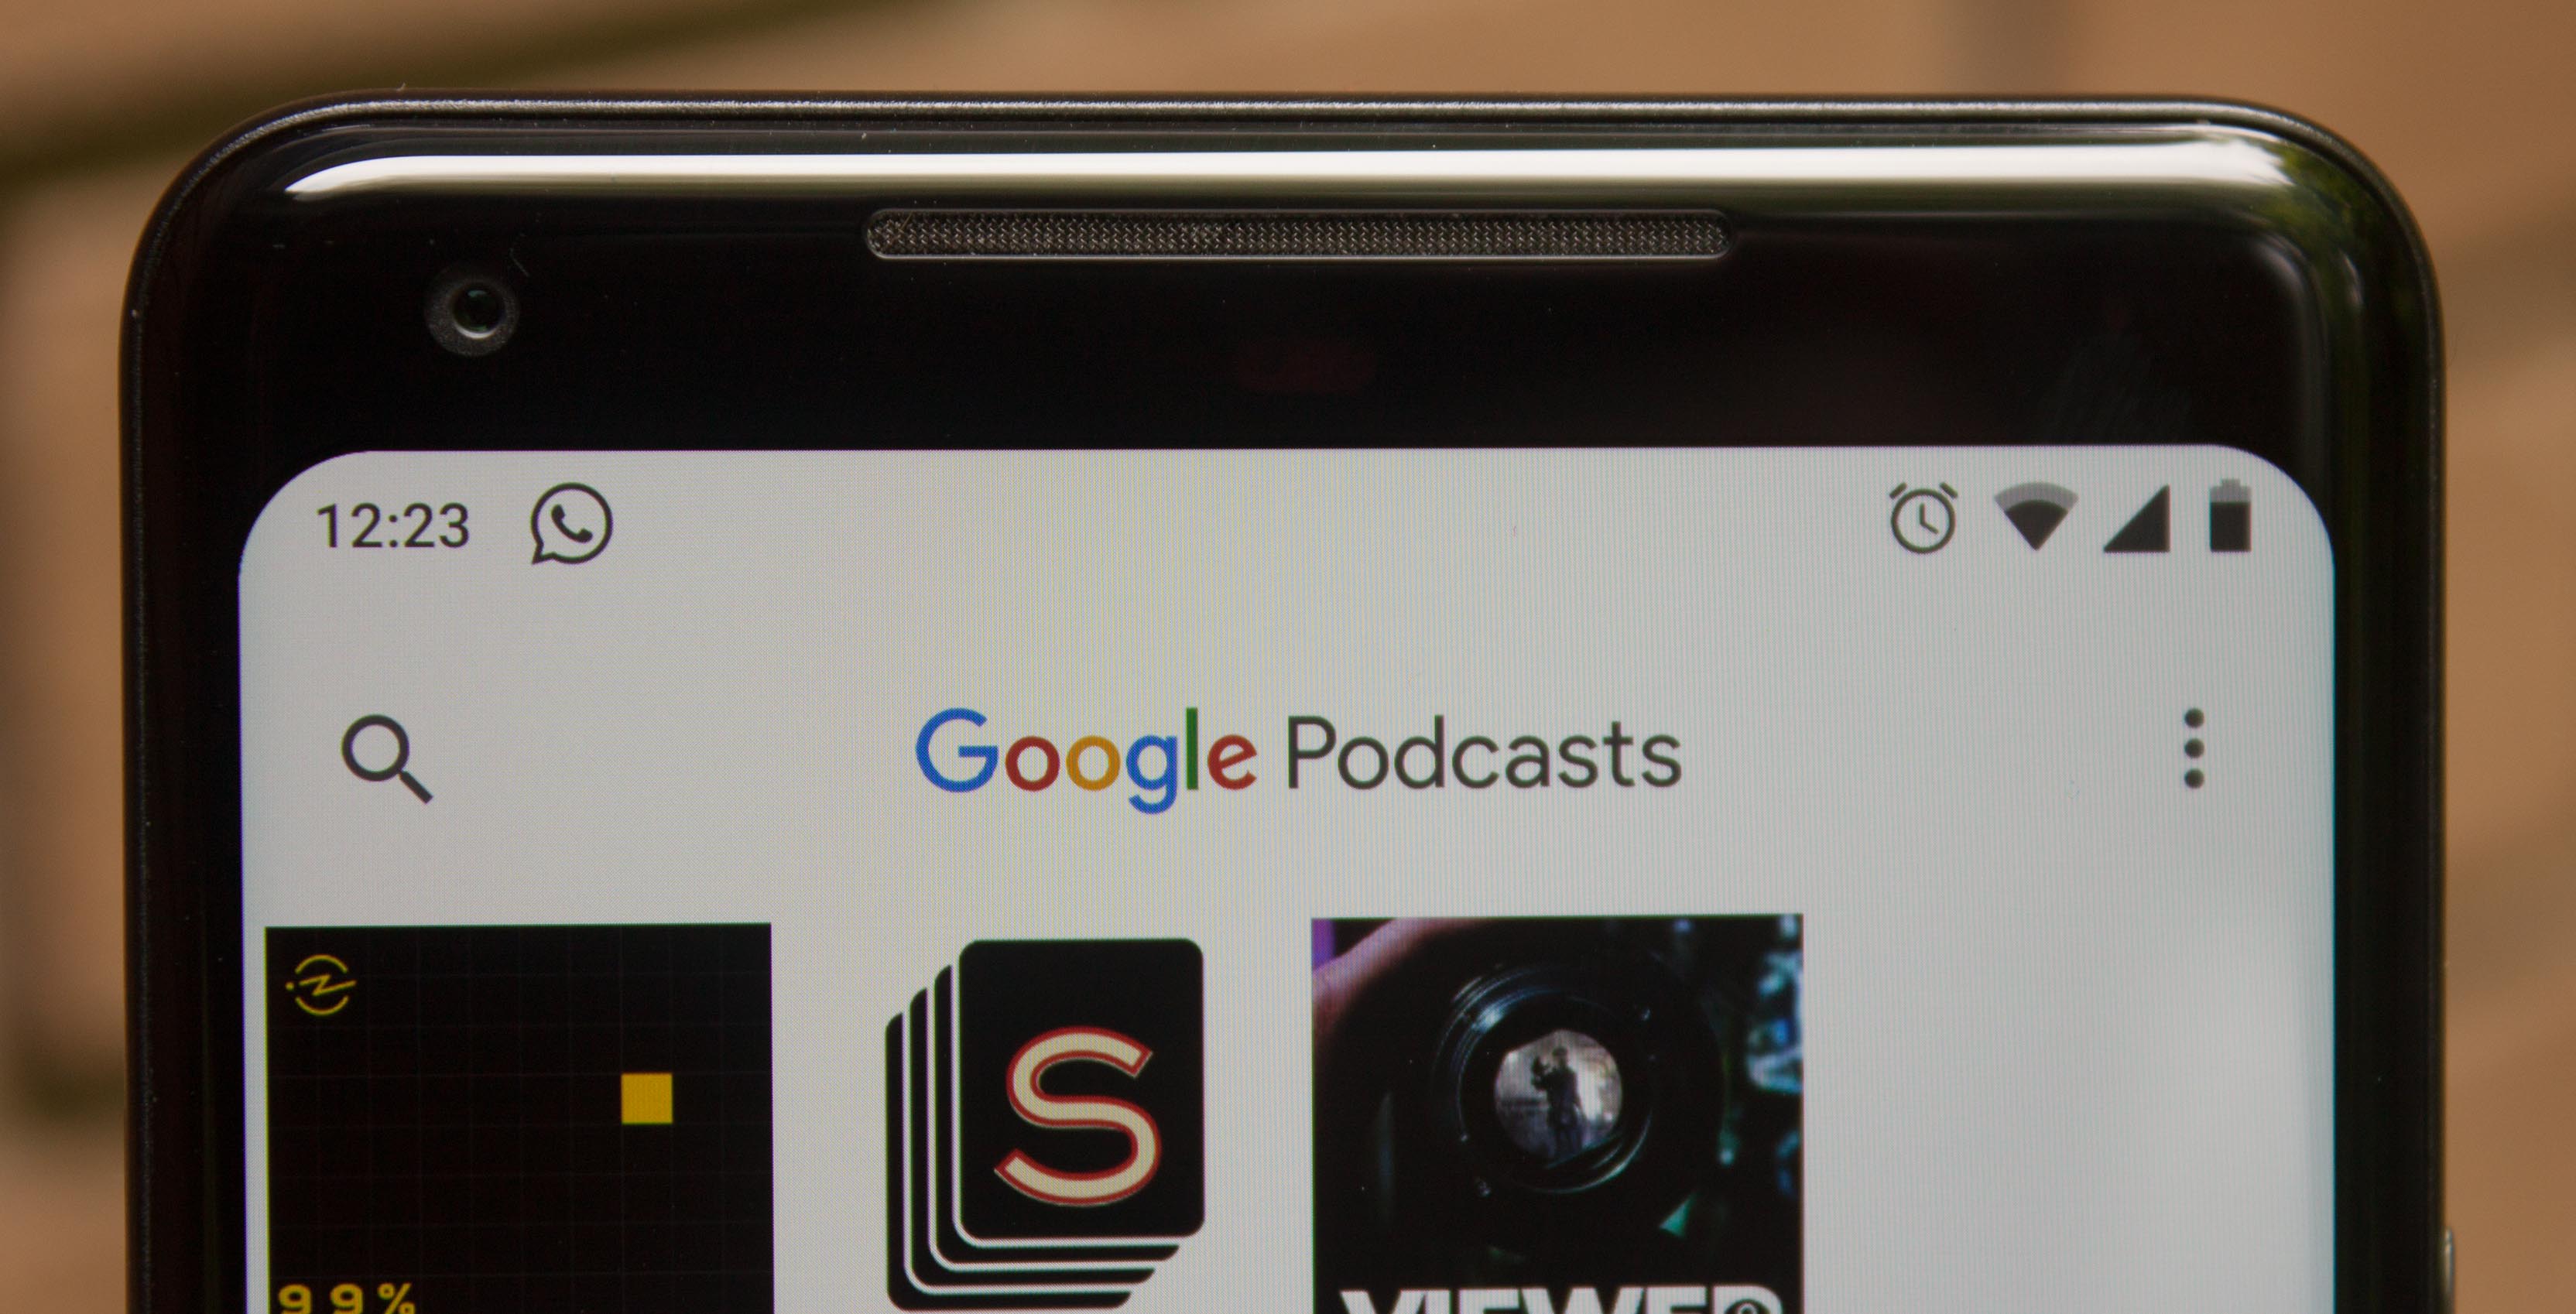 Google Podcasts in the Google app